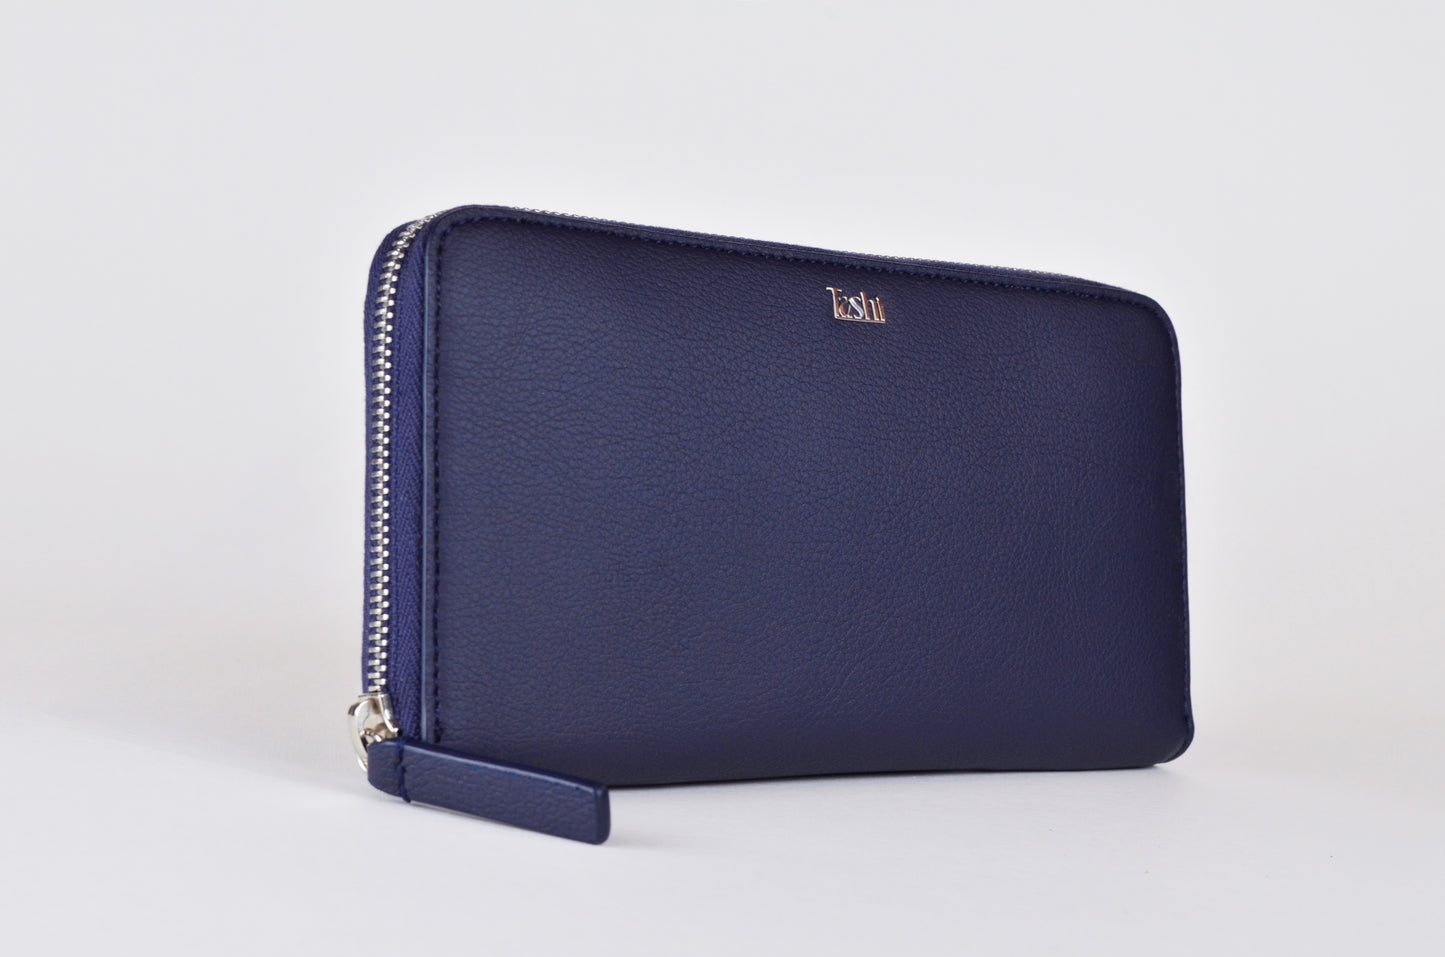 Sustainable fashion accessory: Tashi SARL's navy cactus leather wallet. Three quater view